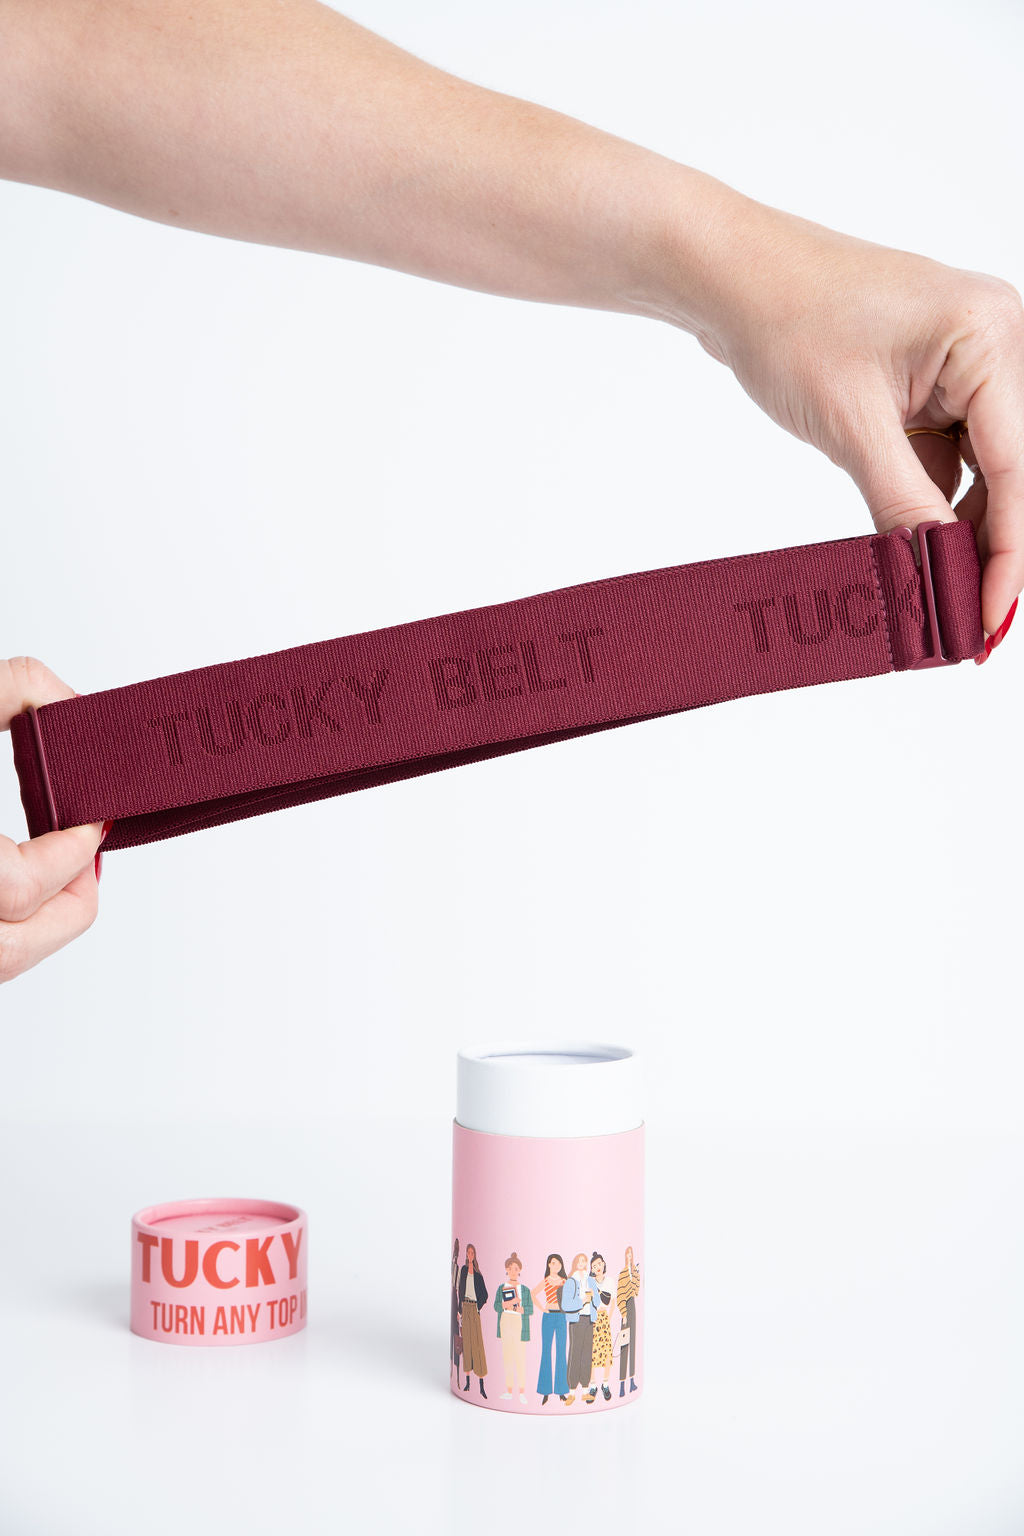 TUCKY ™️ on Instagram: Hey! I'm Brooke and I'm the creator of Tucky Belt.  I created the Tucky Belt when I was looking for something that let me crop  my top anywhere